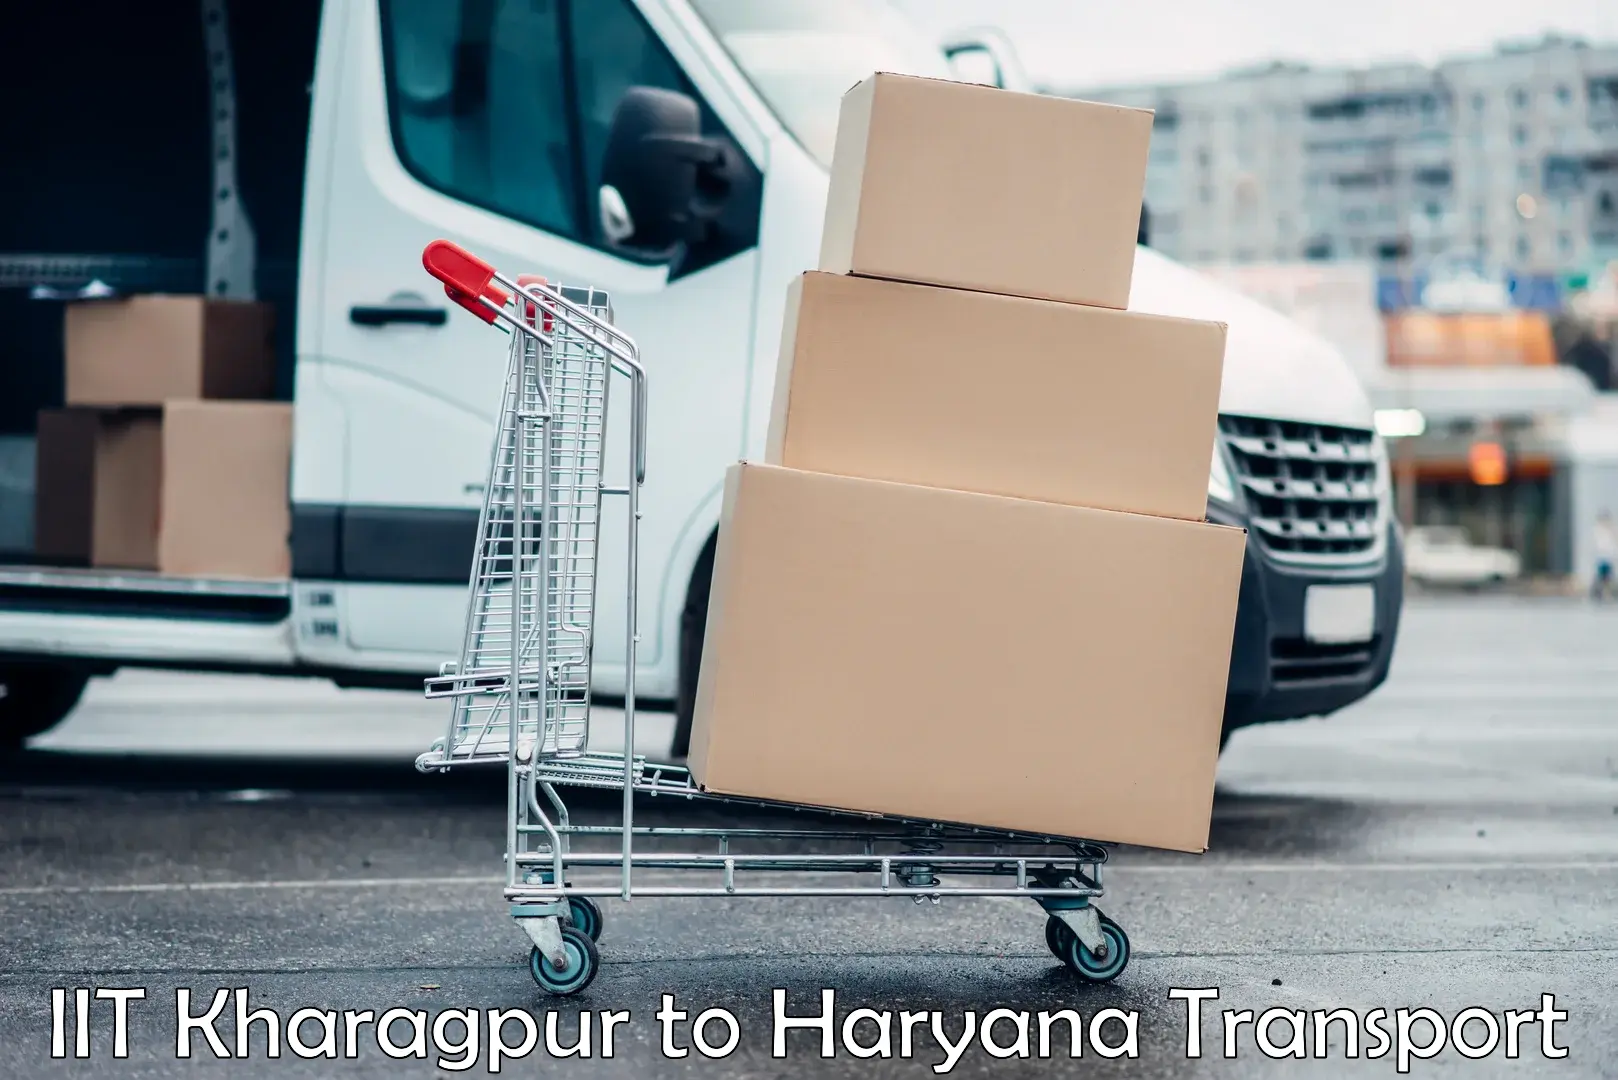 Transport bike from one state to another IIT Kharagpur to Bilaspur Haryana